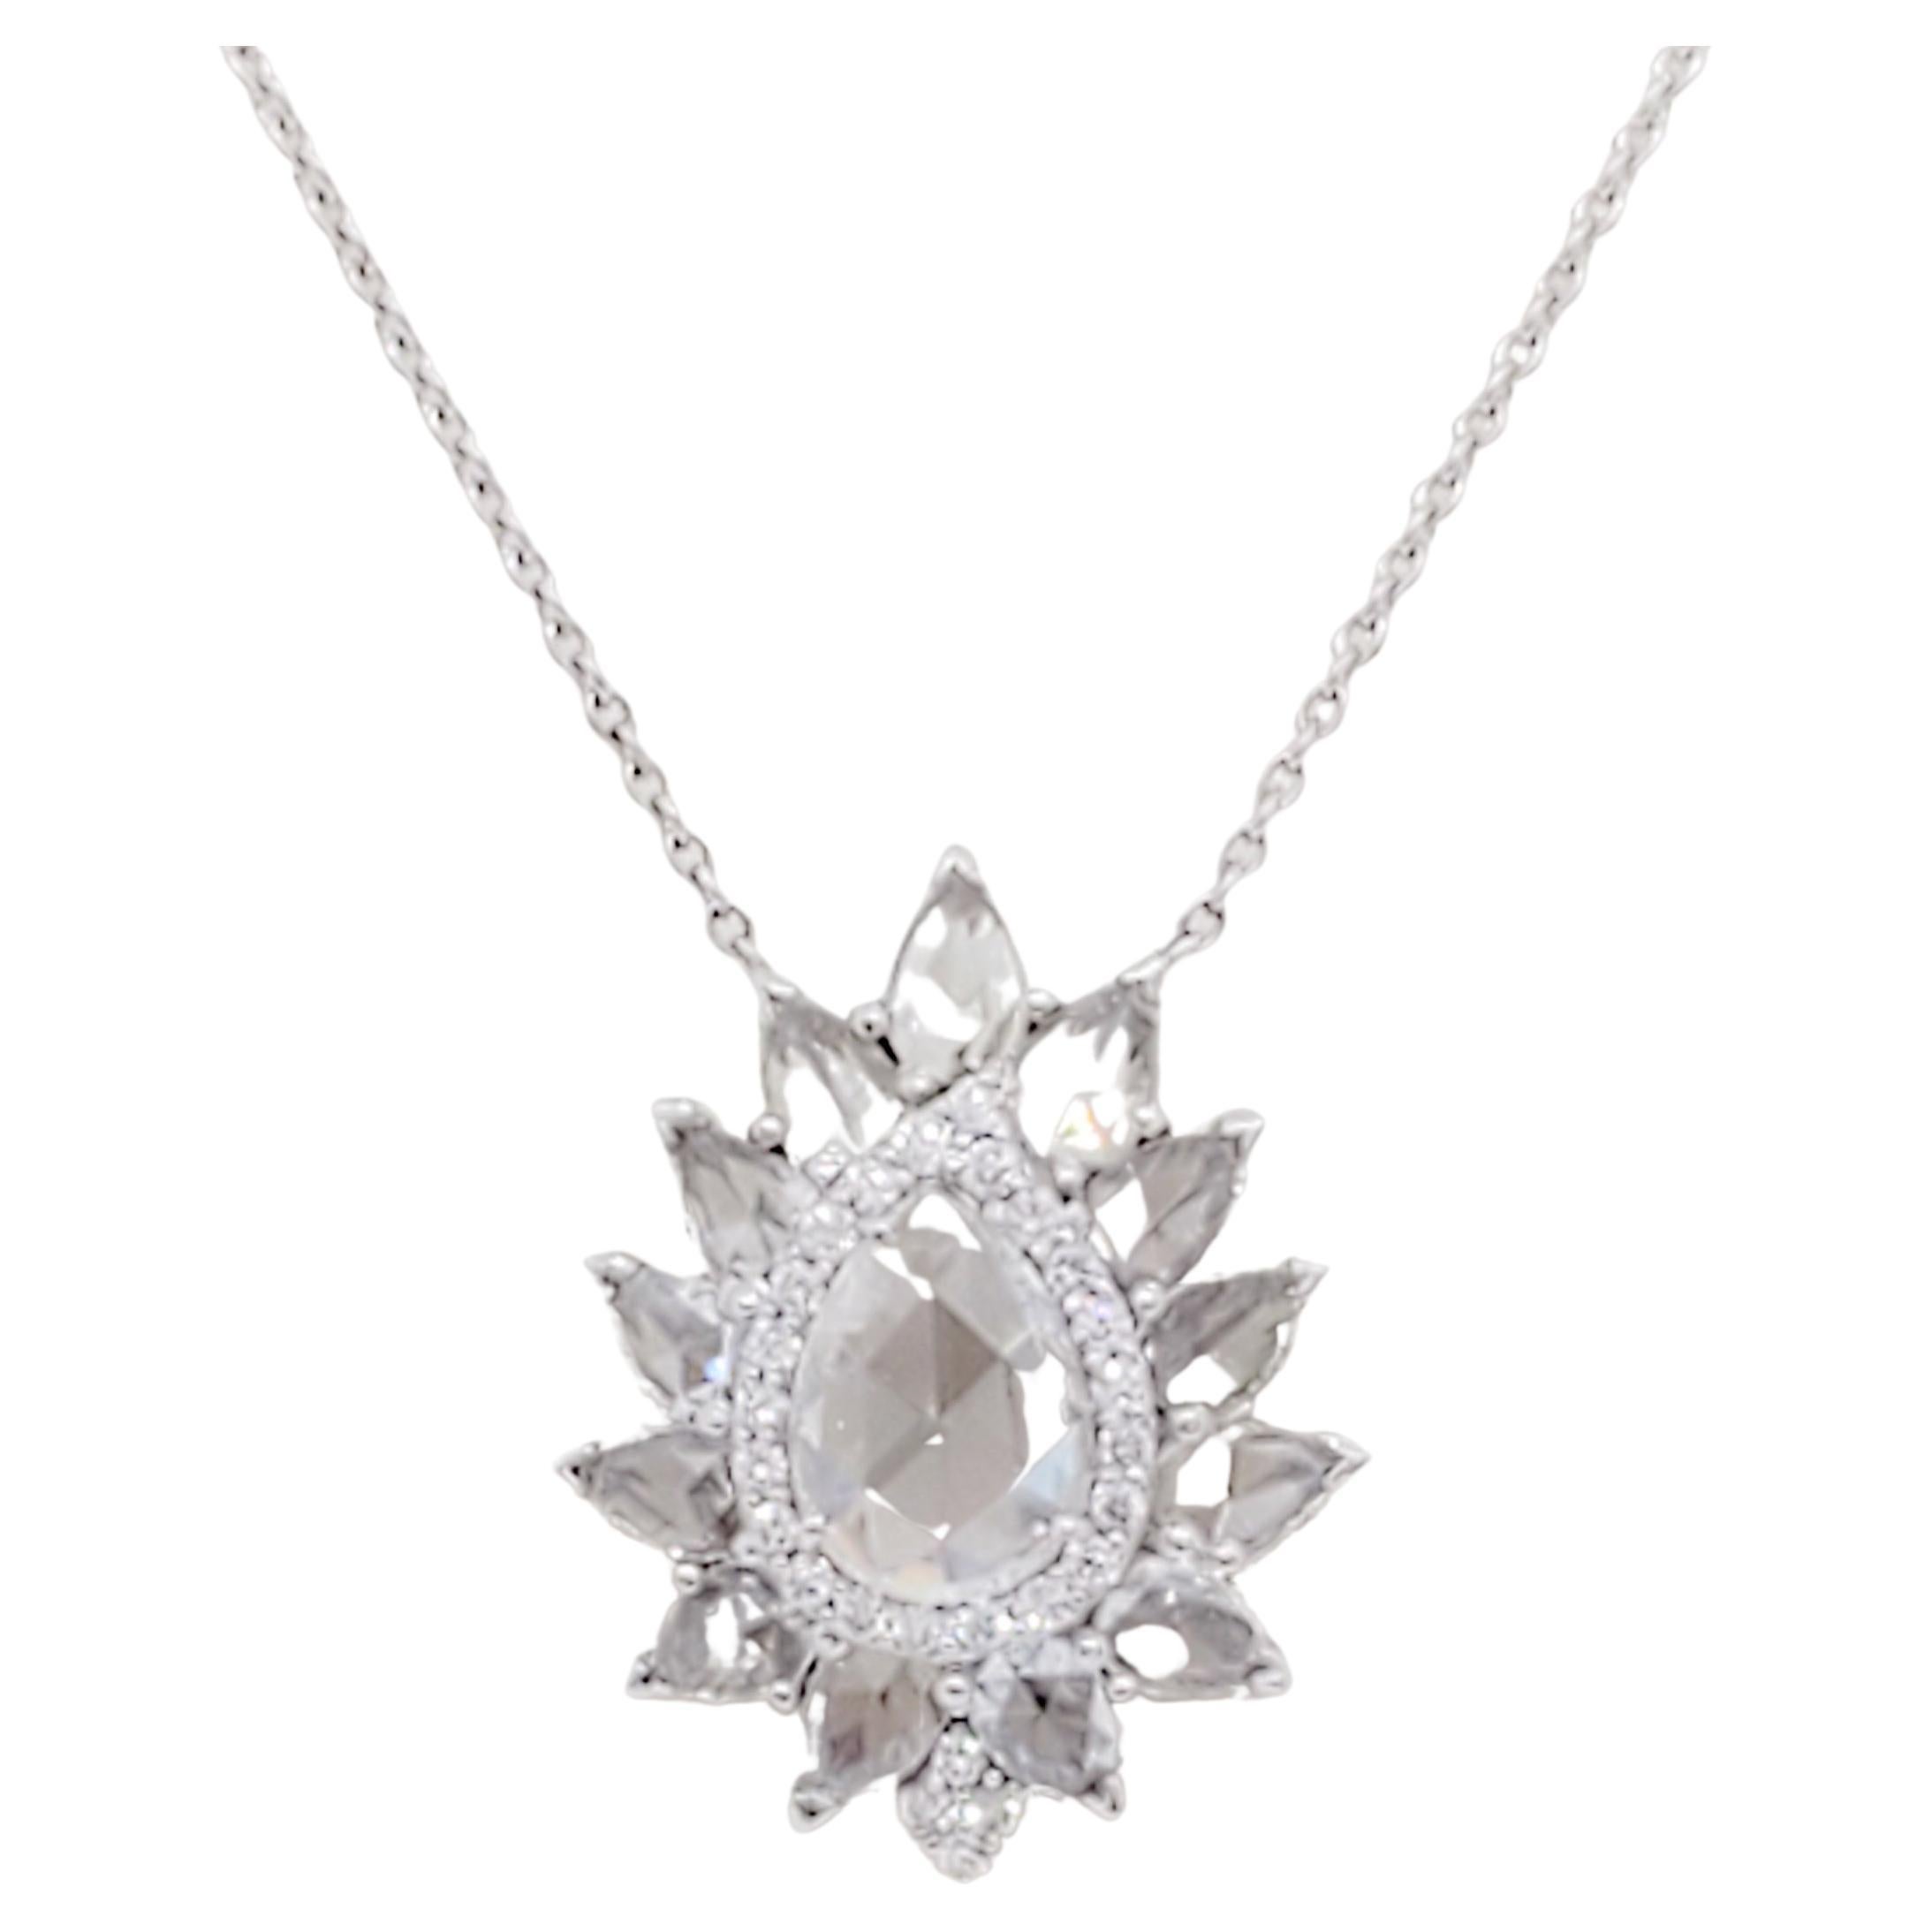 White Diamond Rose Cut Pendant Necklace in 18k White Gold For Sale